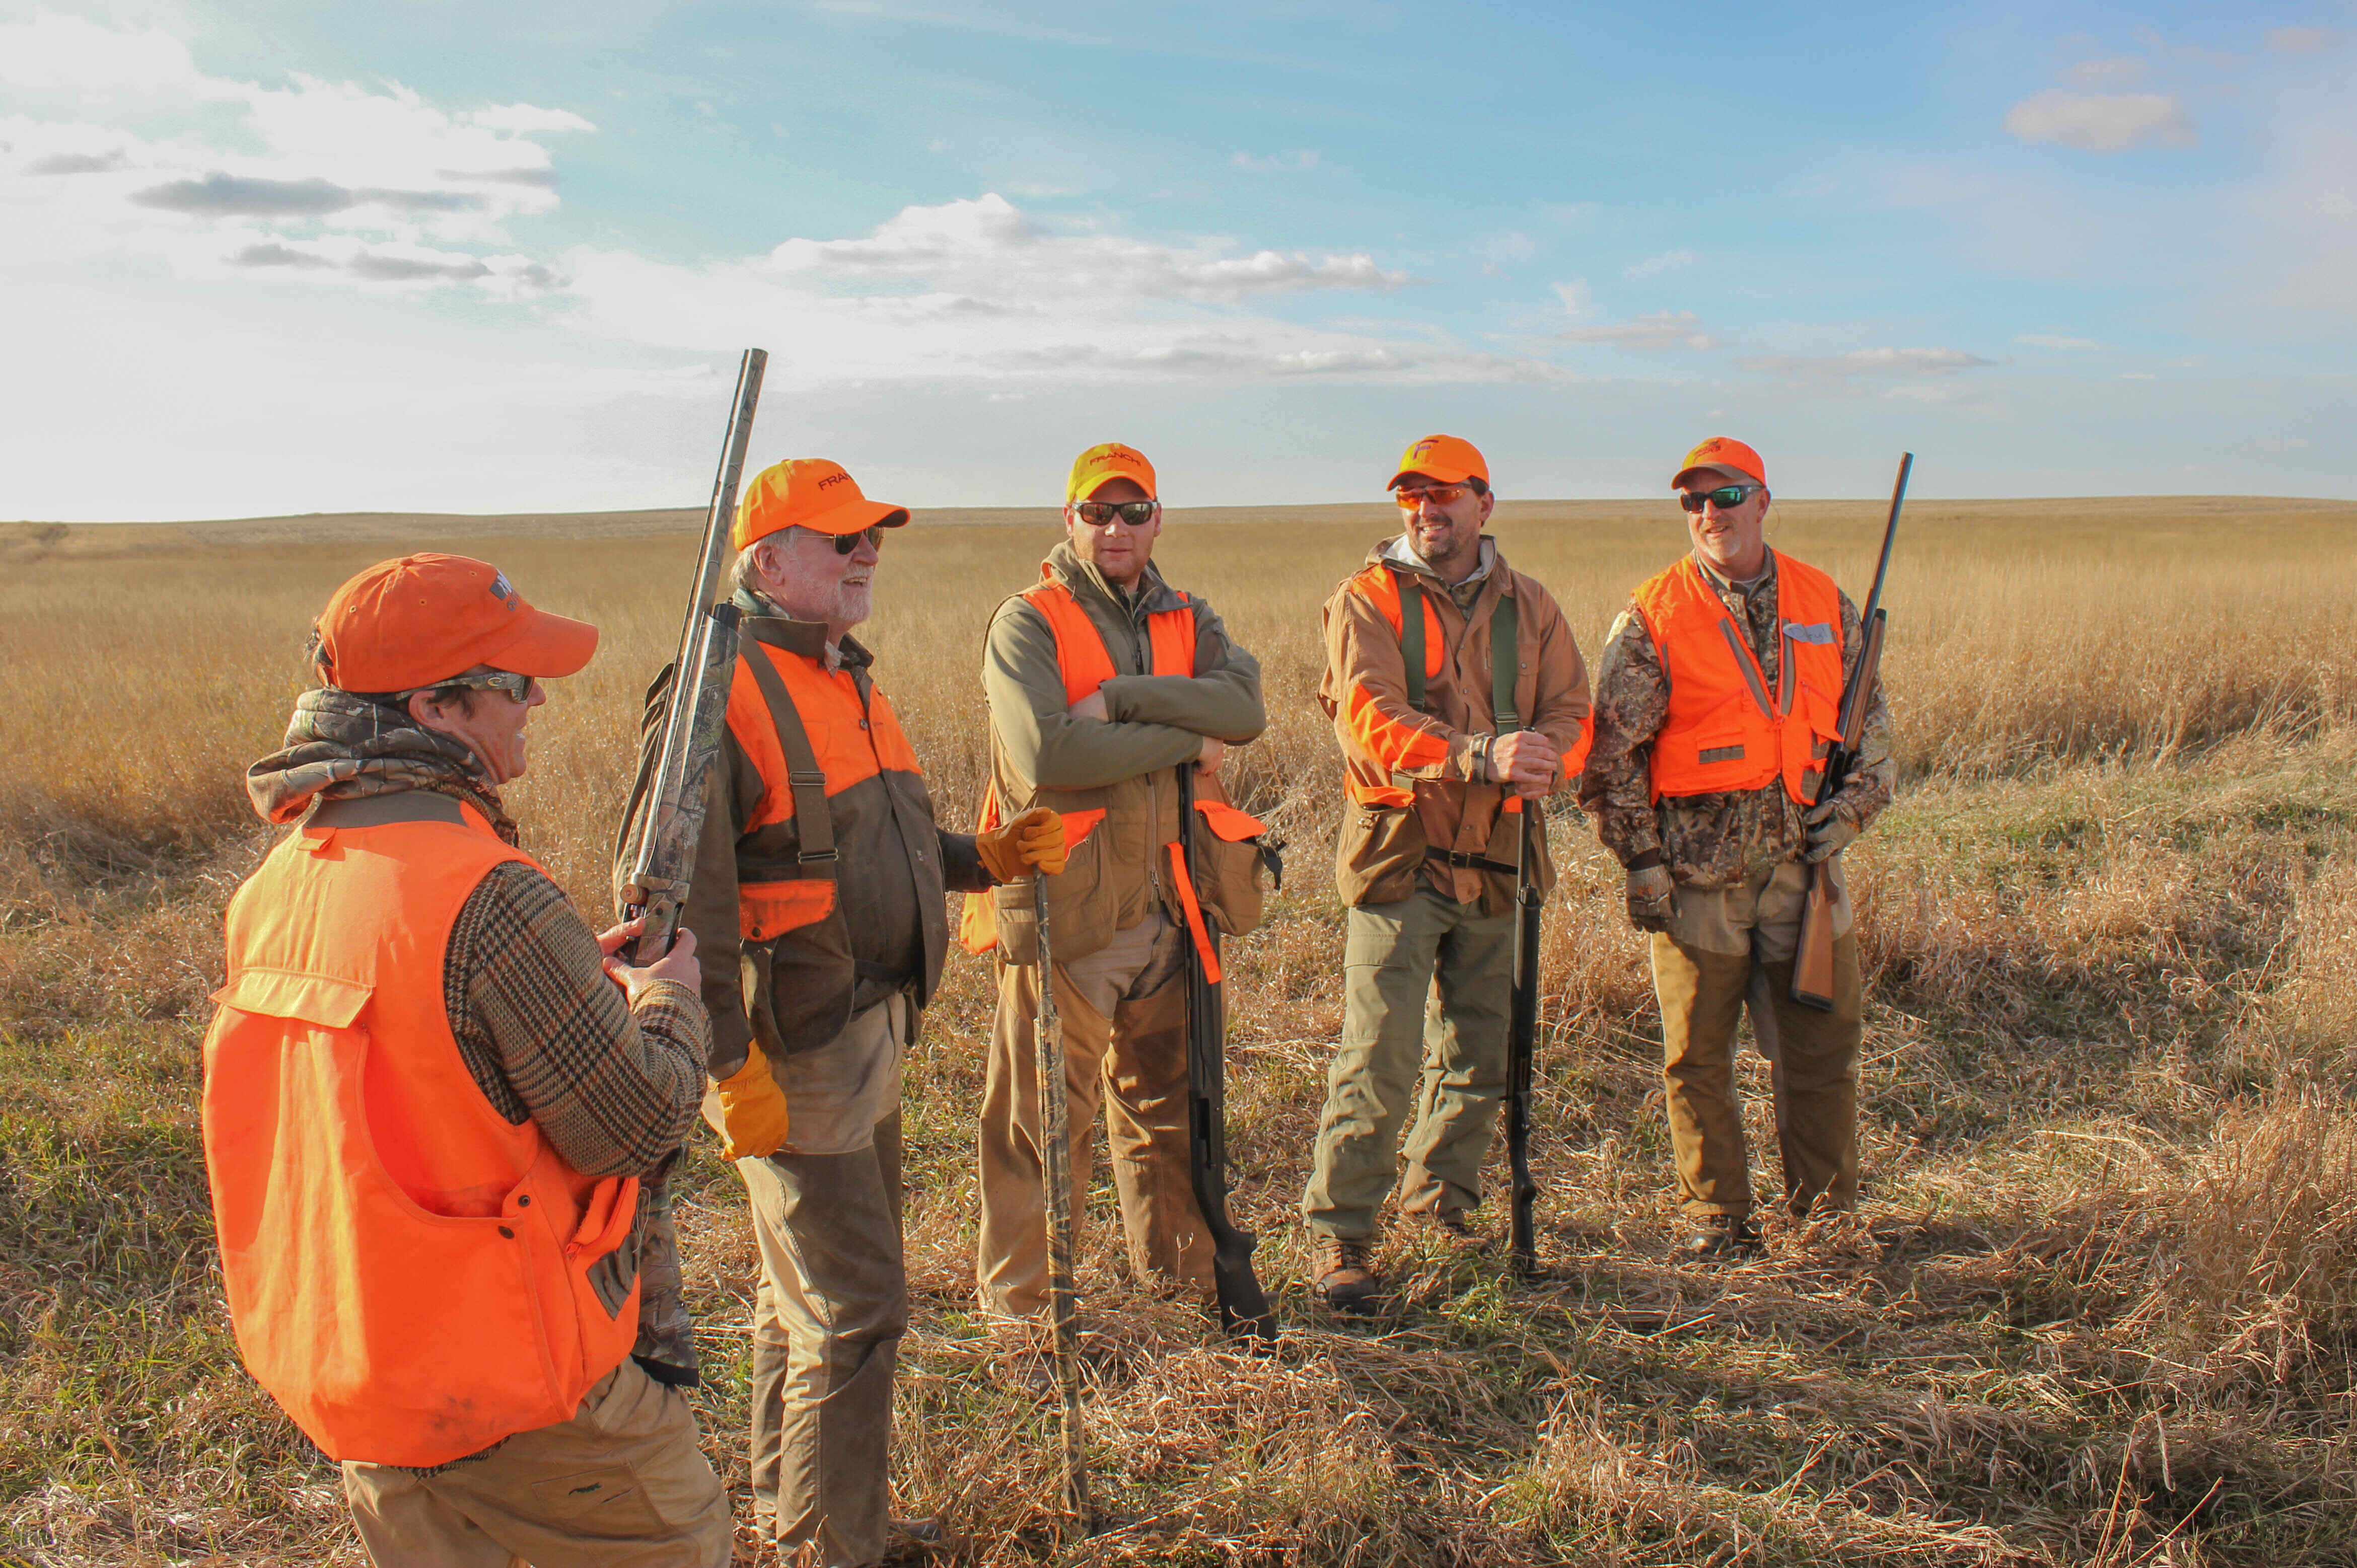 Pheasant Hunting Gear - NSSF Let's Go Hunting